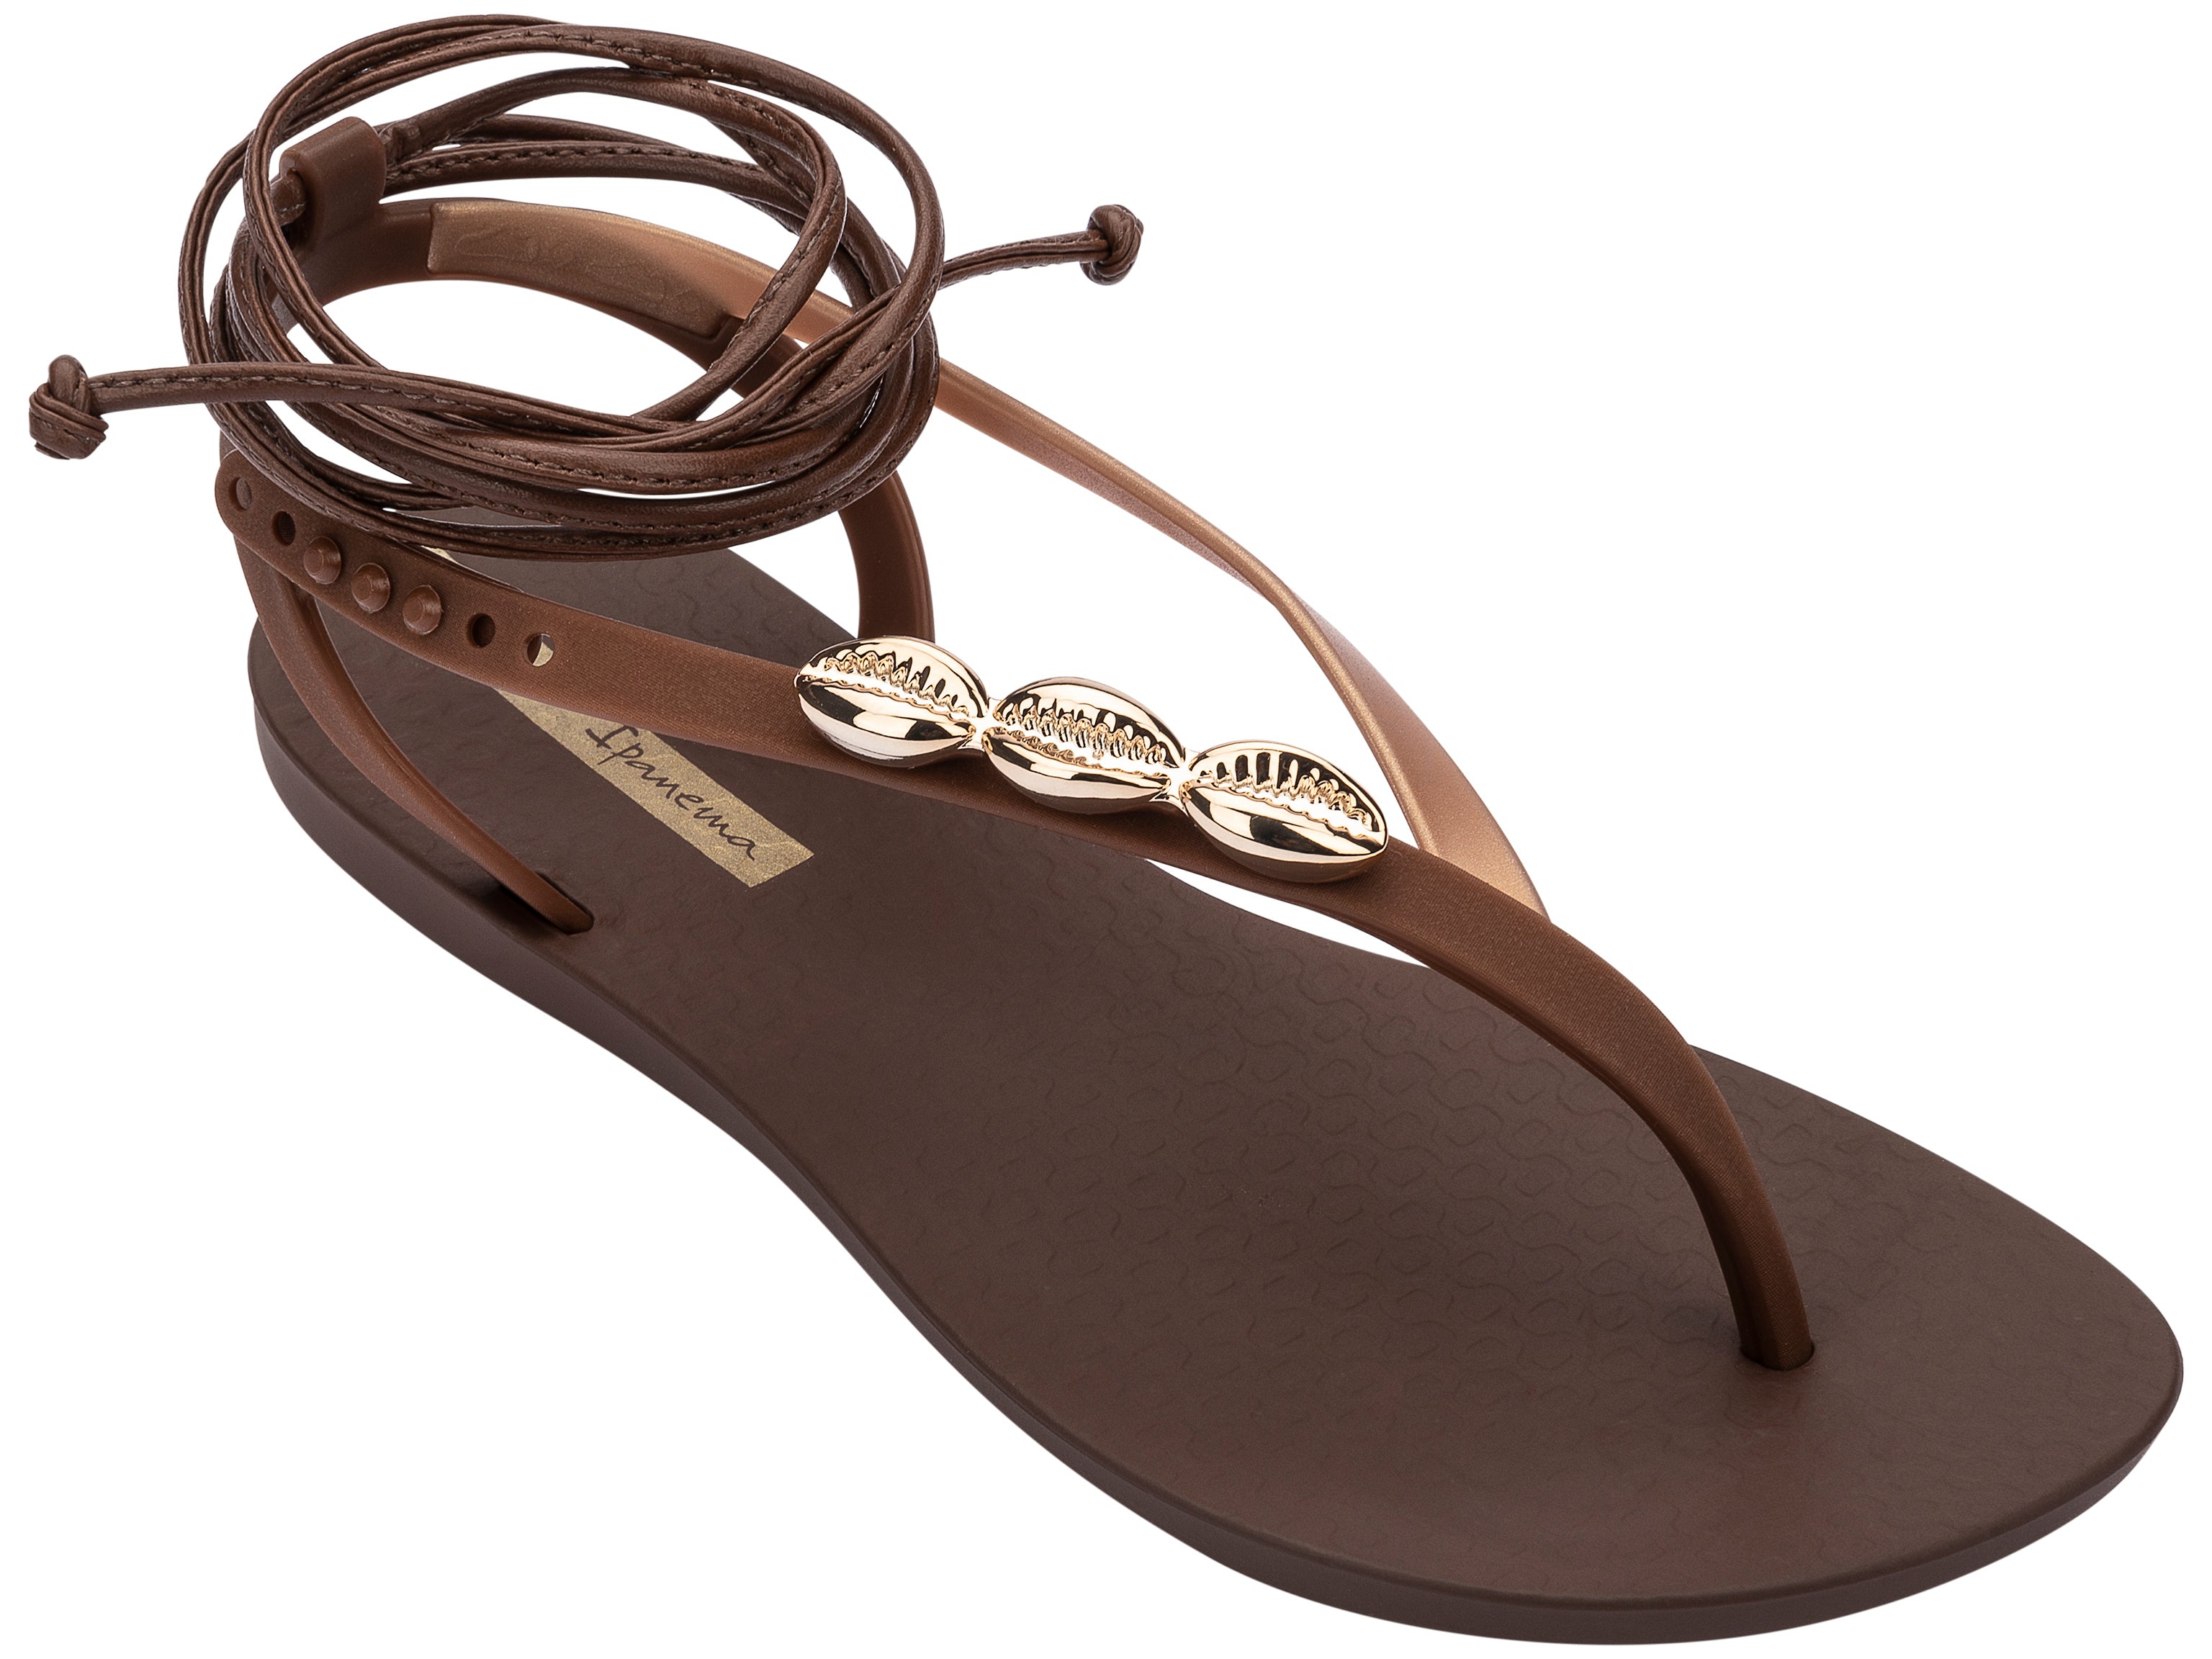 Angled view of a brown Ipanema Salty Strappy women's sandal with ankle tie up and 3 gold shells on the strap.